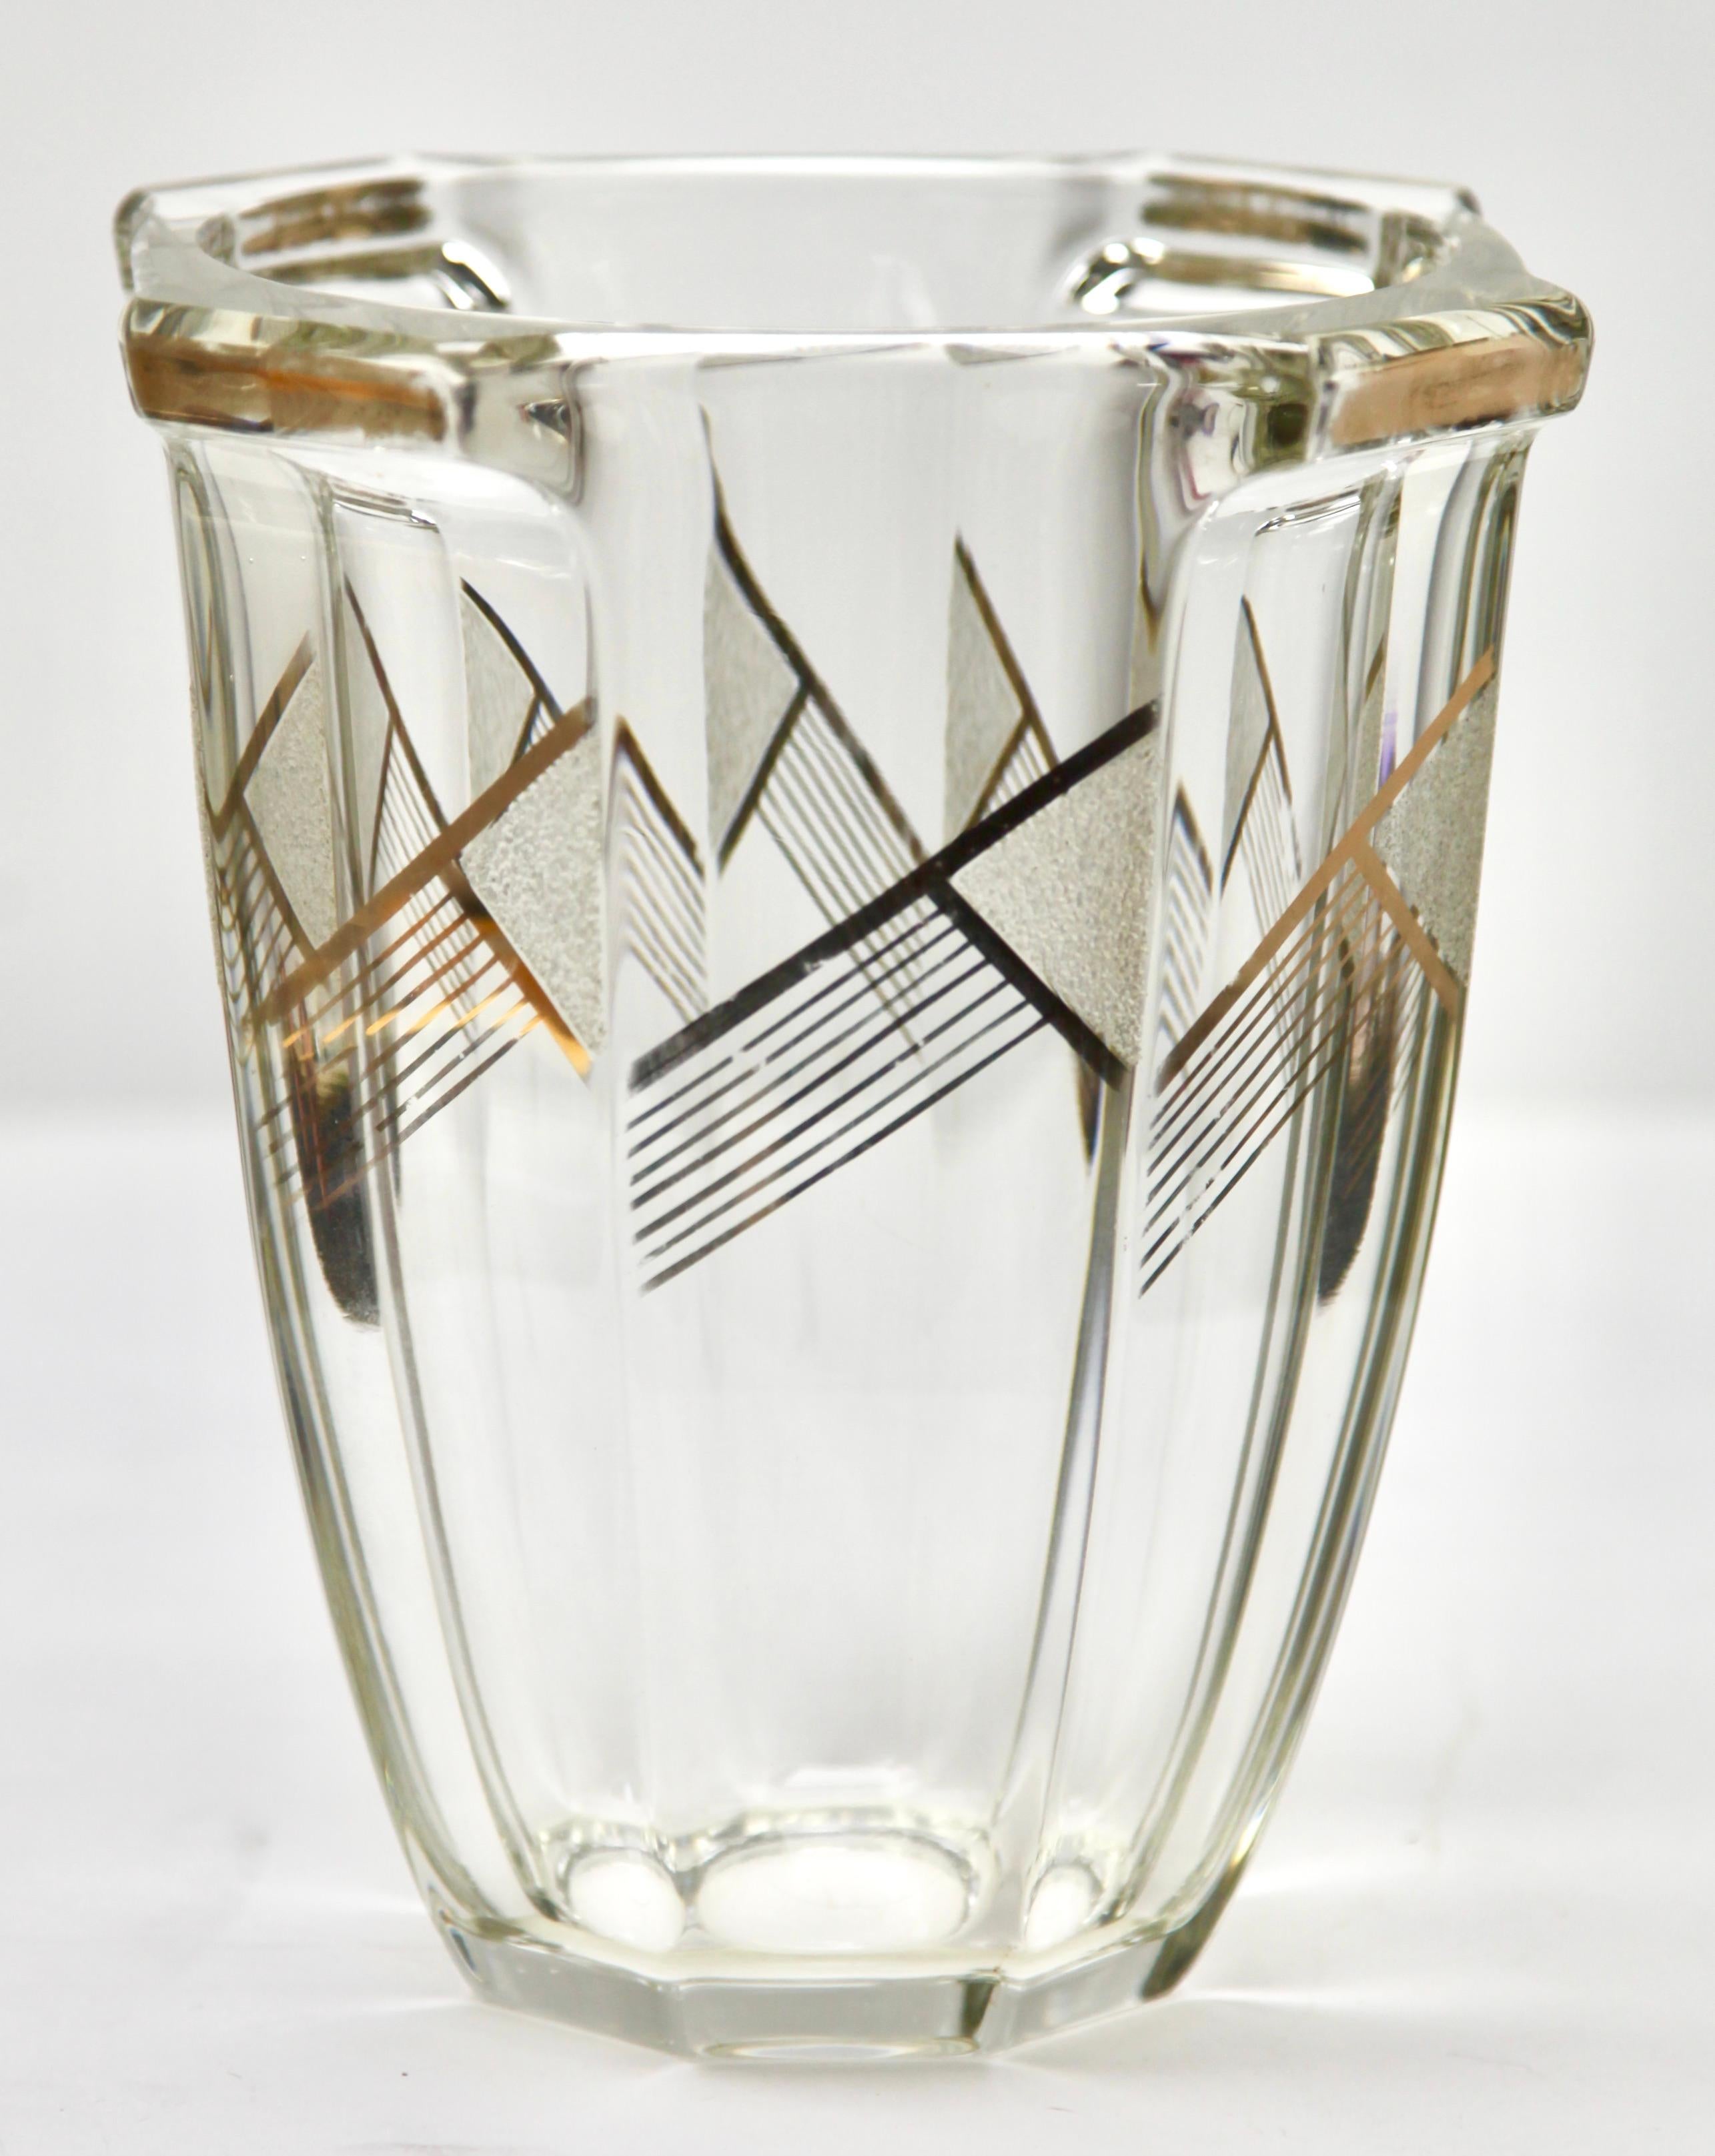 Ludwig Moser & Söhne Karlsbad. 
Signed: GERMANY
Heavy crystal clear faceted vase with eight facets.

A beautiful example of Post-war deco design and an early example. 
This midcentury rectangular vase has been made, with abstract/geometric